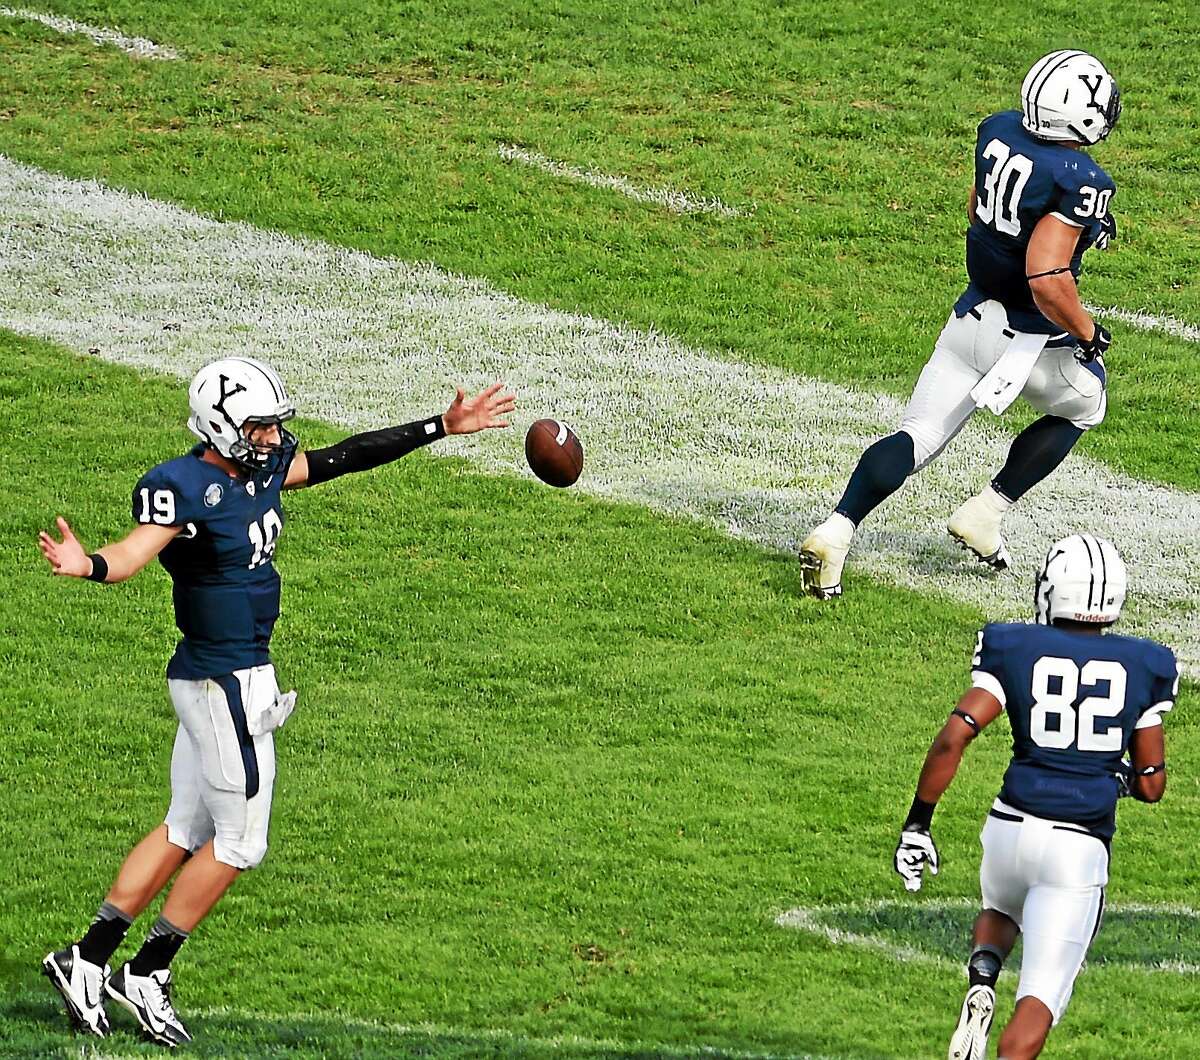 Yale quarterback Morgan Roberts, left, celebrates with teammate Tyler Varga, center, after he scored a touchdown against Lehigh during a Sept. 20 game at Yale Bowl.